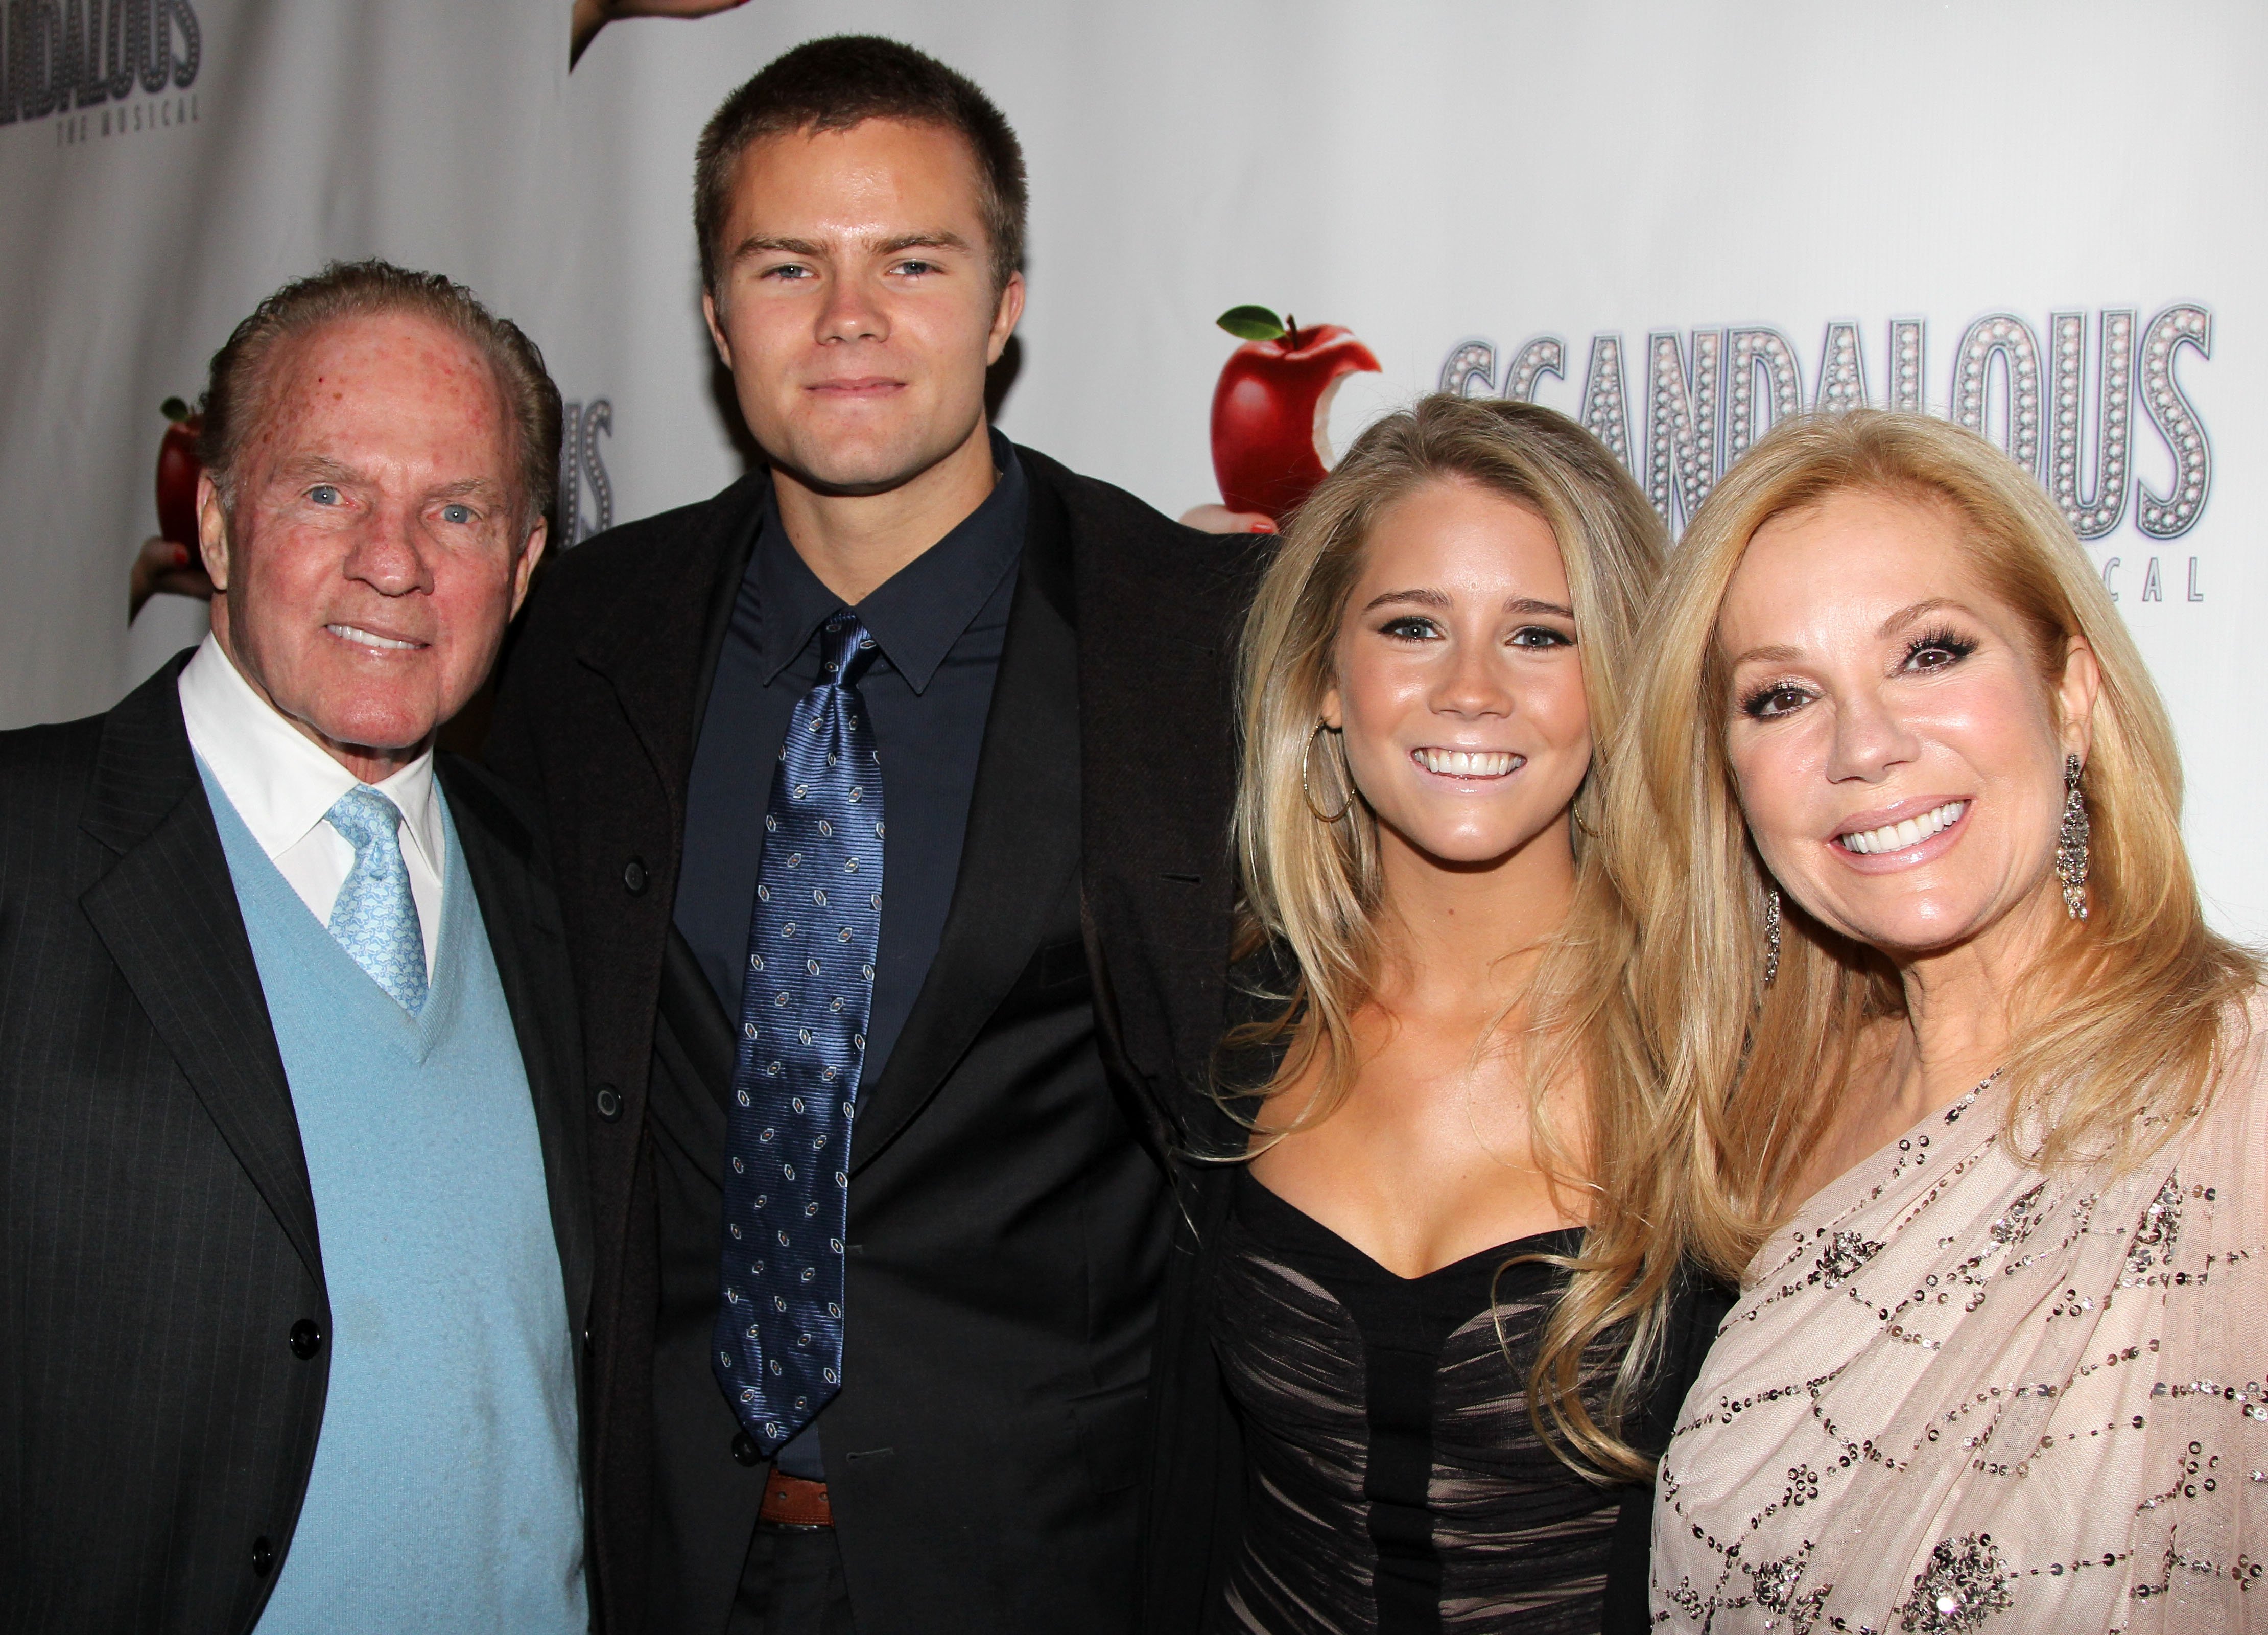 Frank, Cody, Cassidy, and Kathie Lee Gifford at the opening night of "Scandalous" on Broadway on November 15, 2012, in New York City. | Source: Getty Images